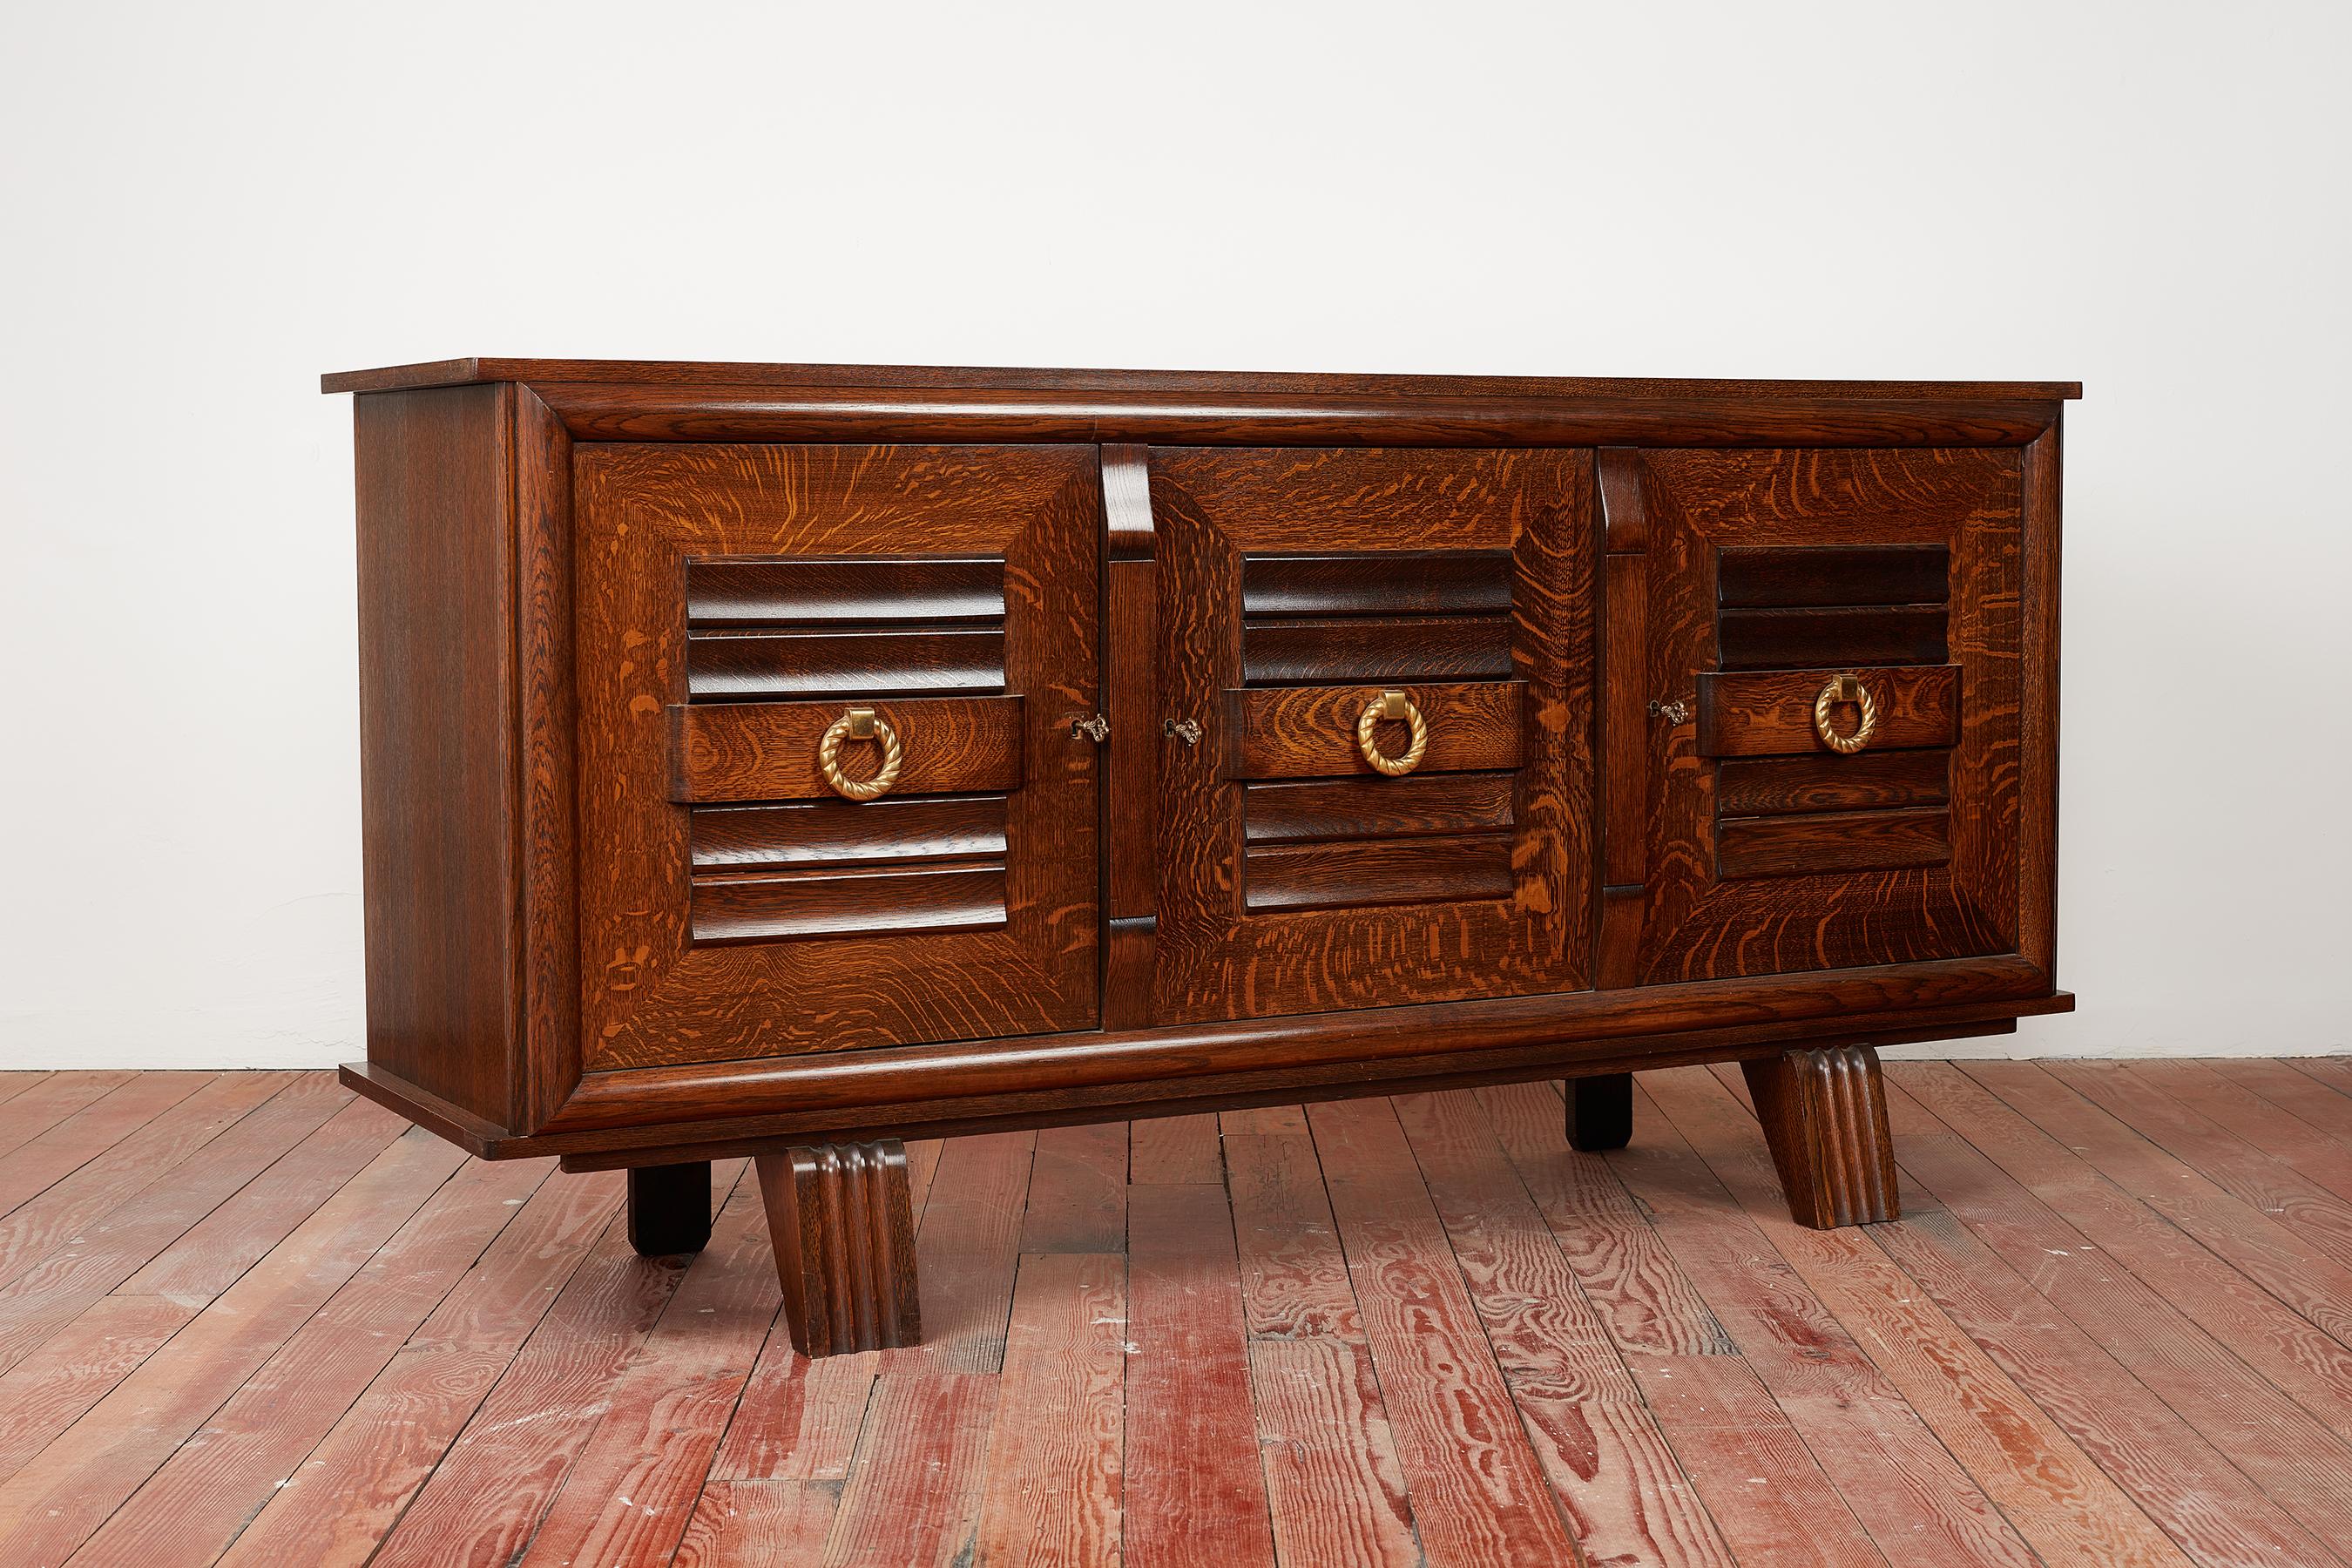 Charles Dudouyt sideboard in beautiful oak patina and carved linear detail 
Three cabinet doors with brass circle hardware open to shelving and a single drawer in center compartment area
Checkerboard inlayed top 
Floating on curved carved legs 
